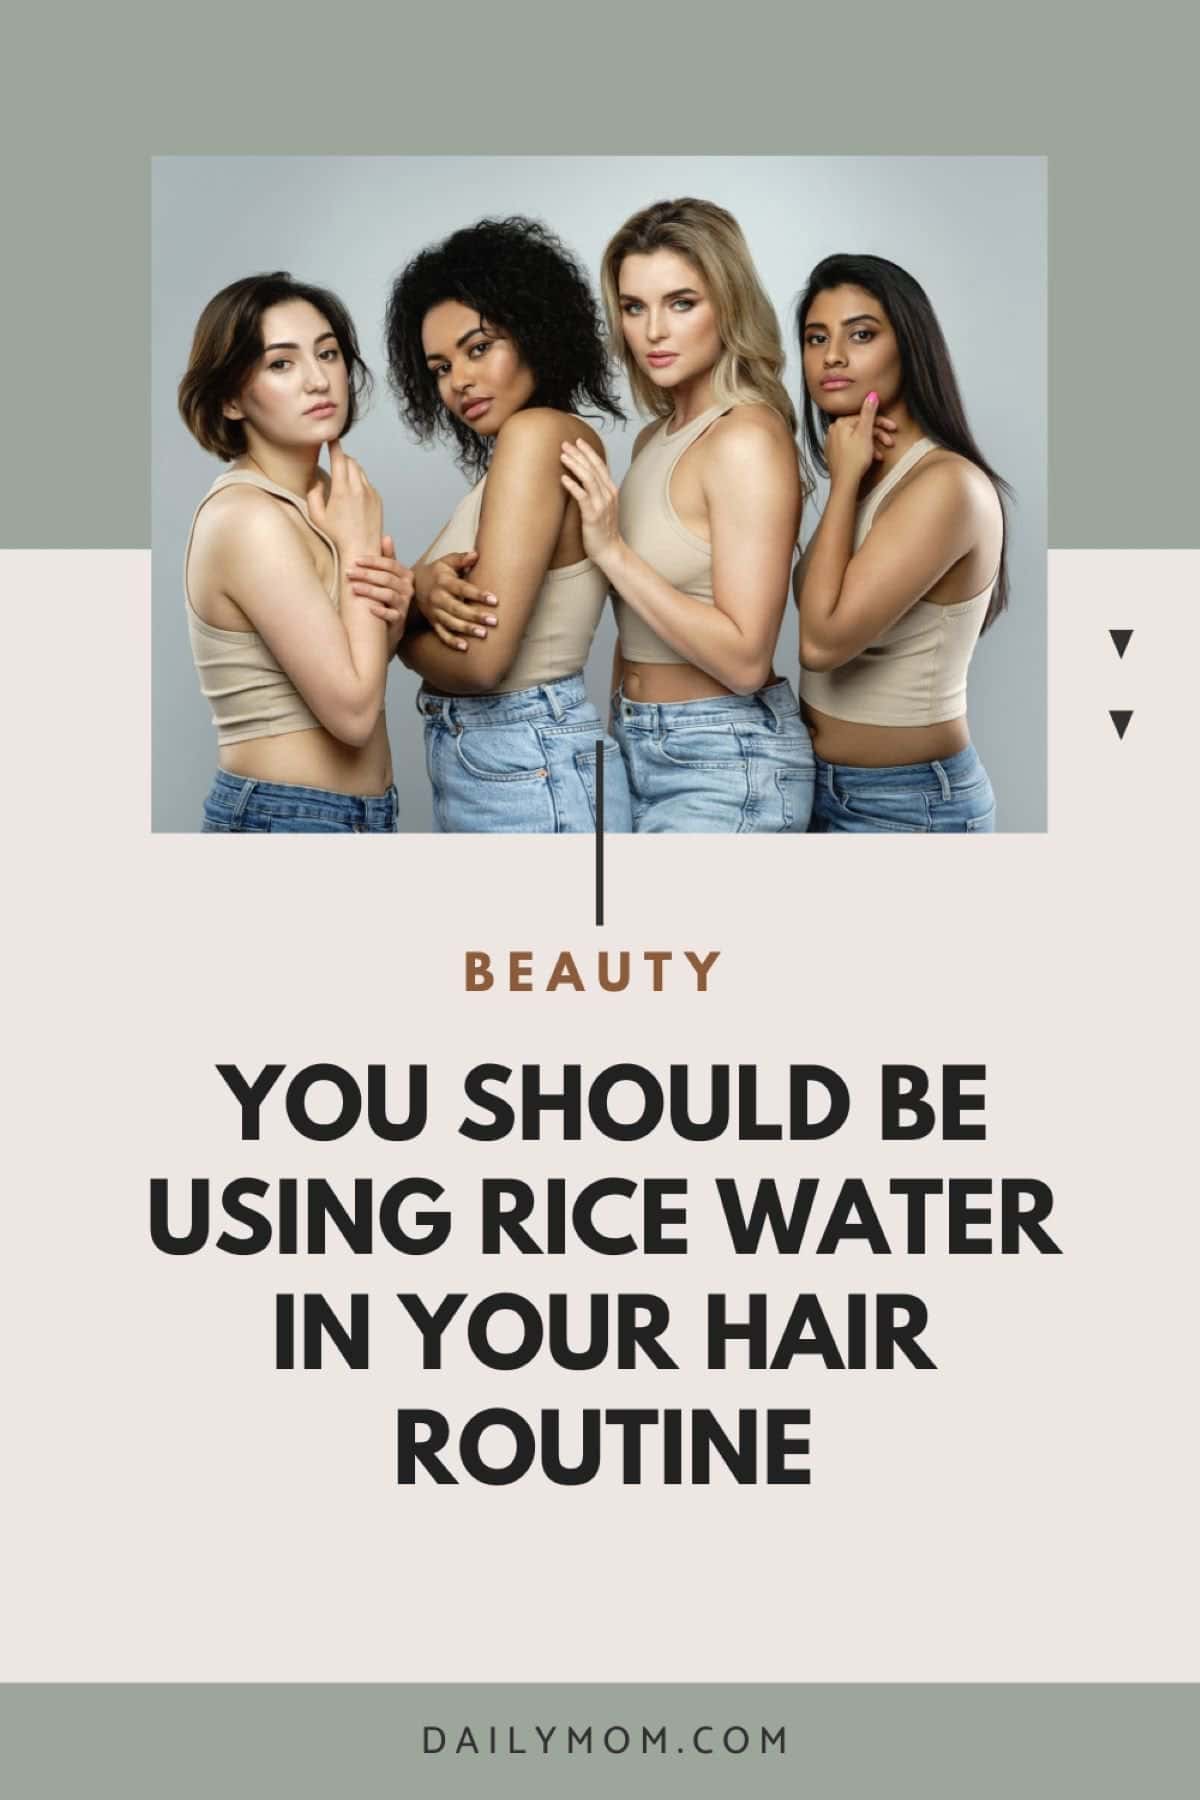 The Benefits Of Using Rice Water For Hair Growth: 3 Methods To Make Your Hair Health Shine 7 Daily Mom, Magazine For Families